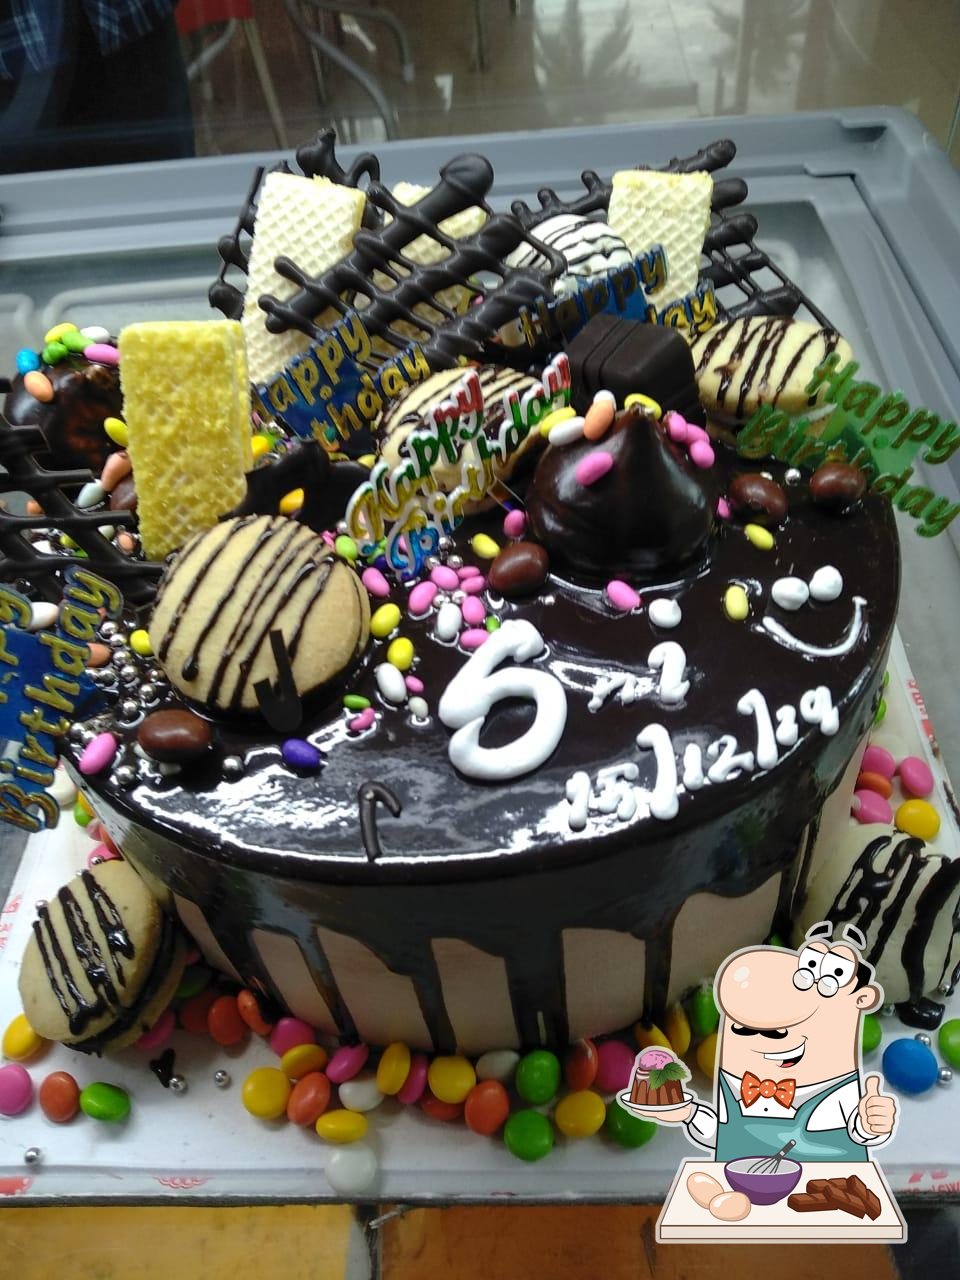 Catalogue - Fb Cakes in Poonamallee, Chennai - Justdial-cacanhphuclong.com.vn